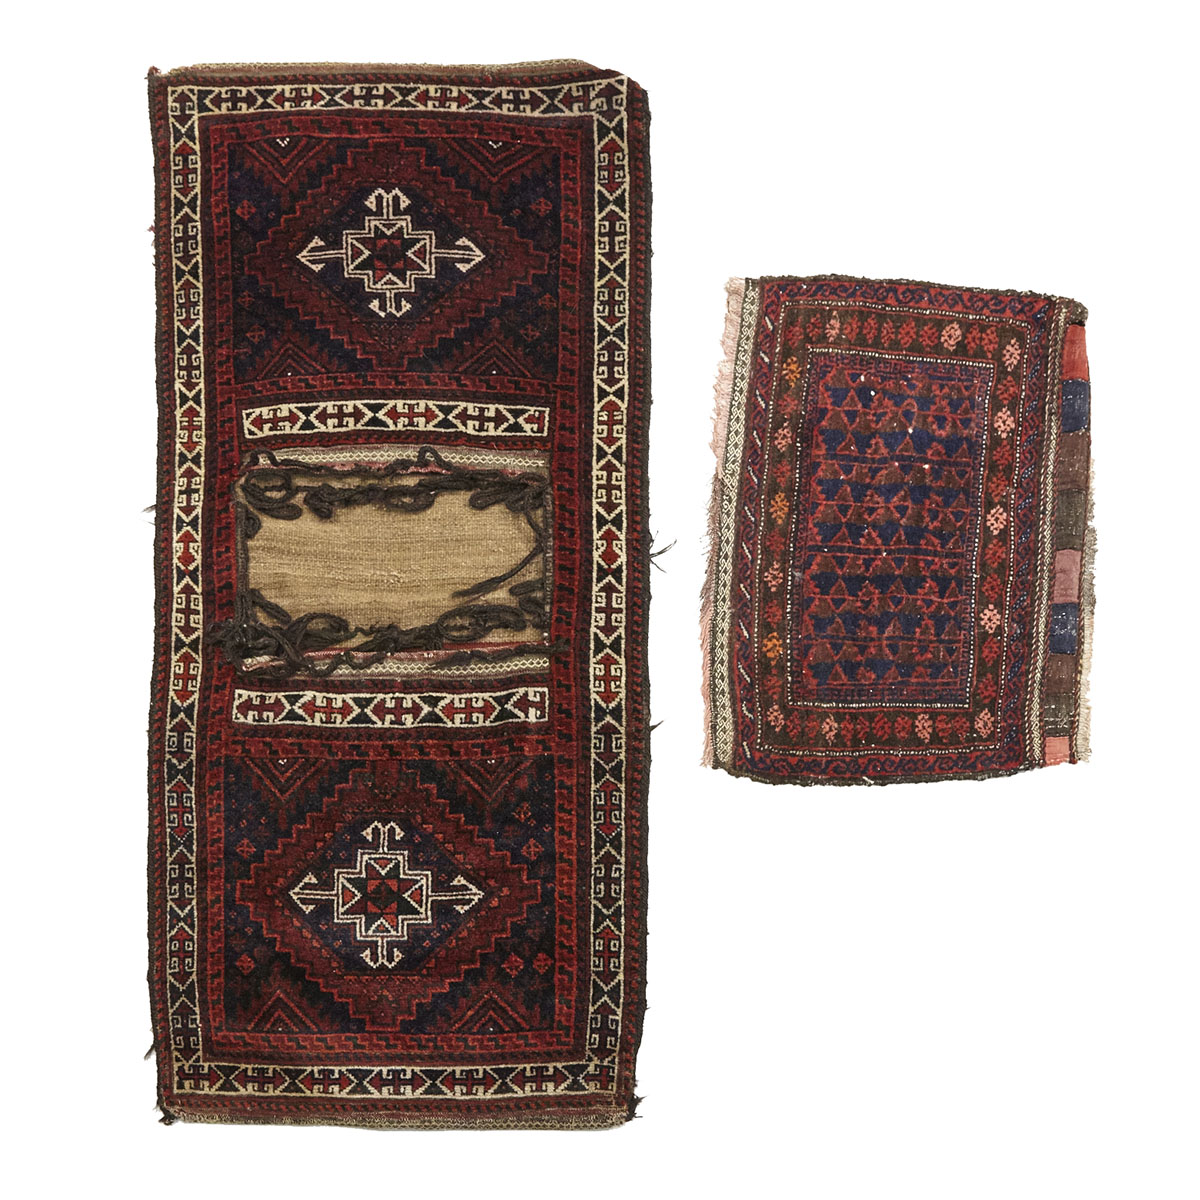 Belouch Double Bag Face together with a Belouch Bag Face, both mid 20th century